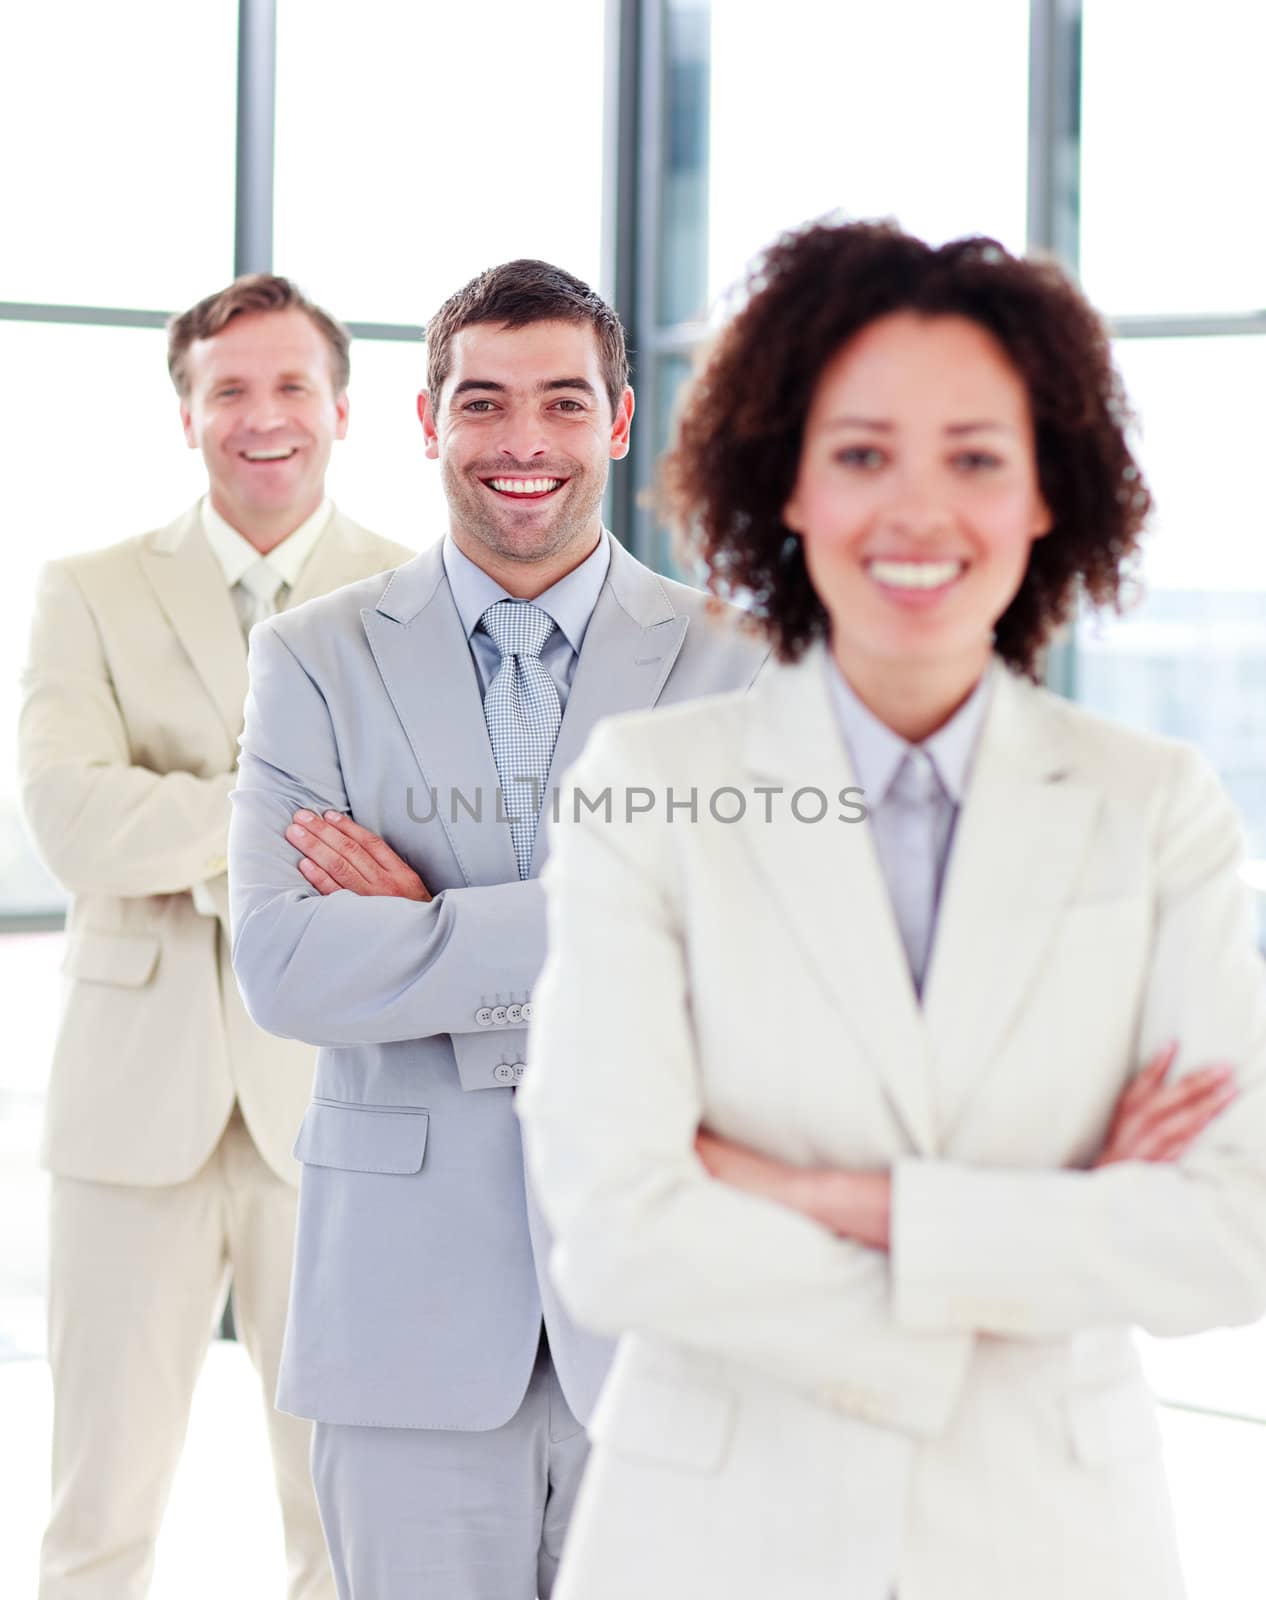 Attractive smiling businessman with folded arms in a row